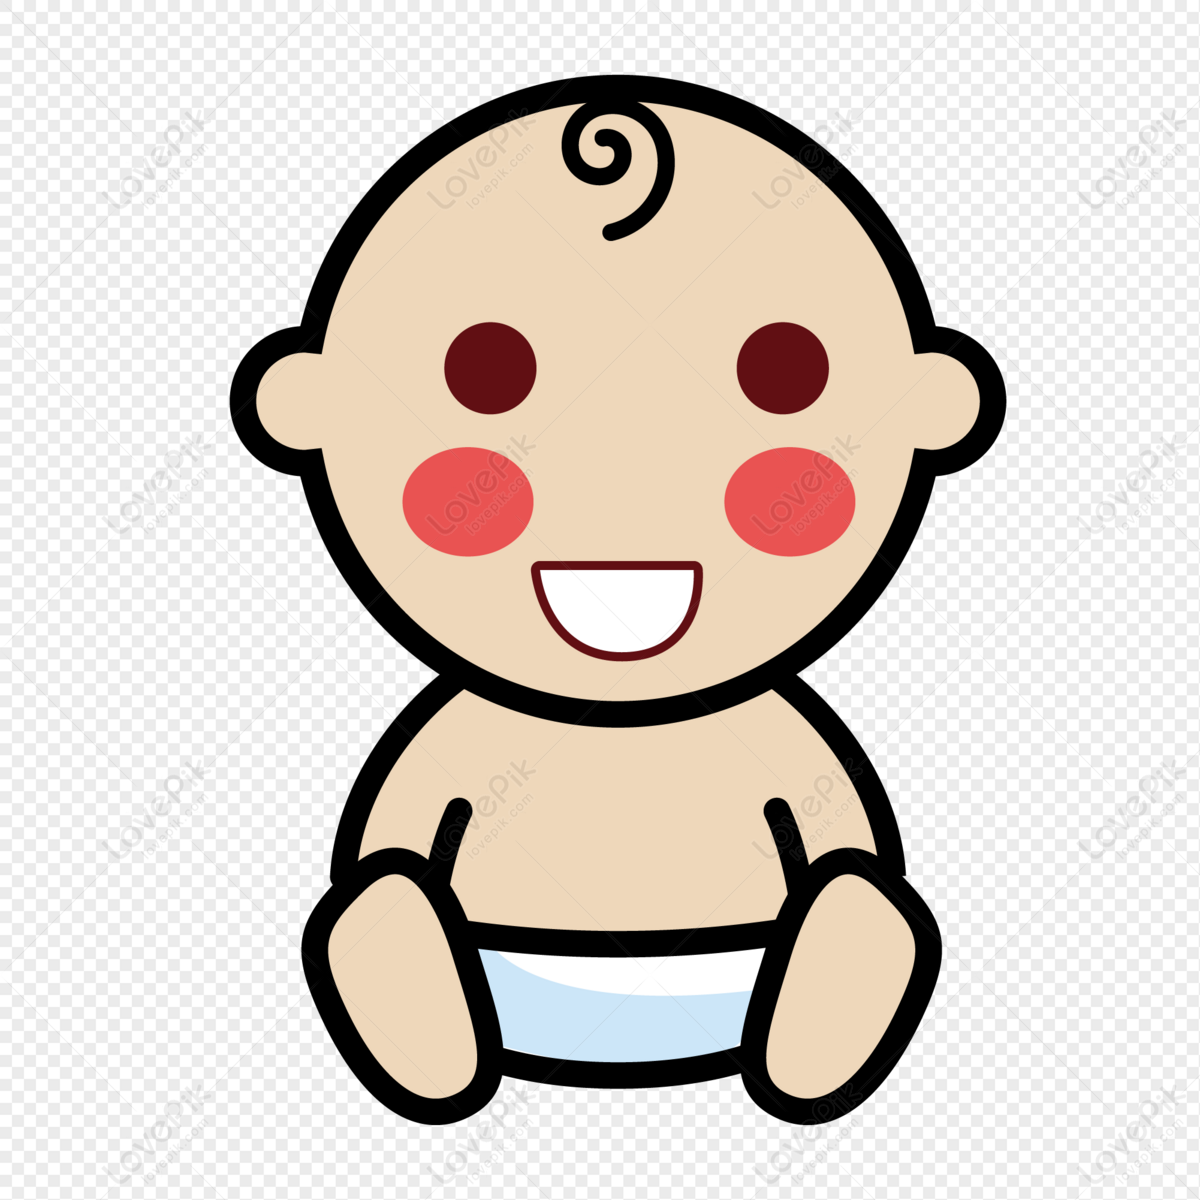 The Decorative Material Pattern Of Baby Cartoon Image PNG ...